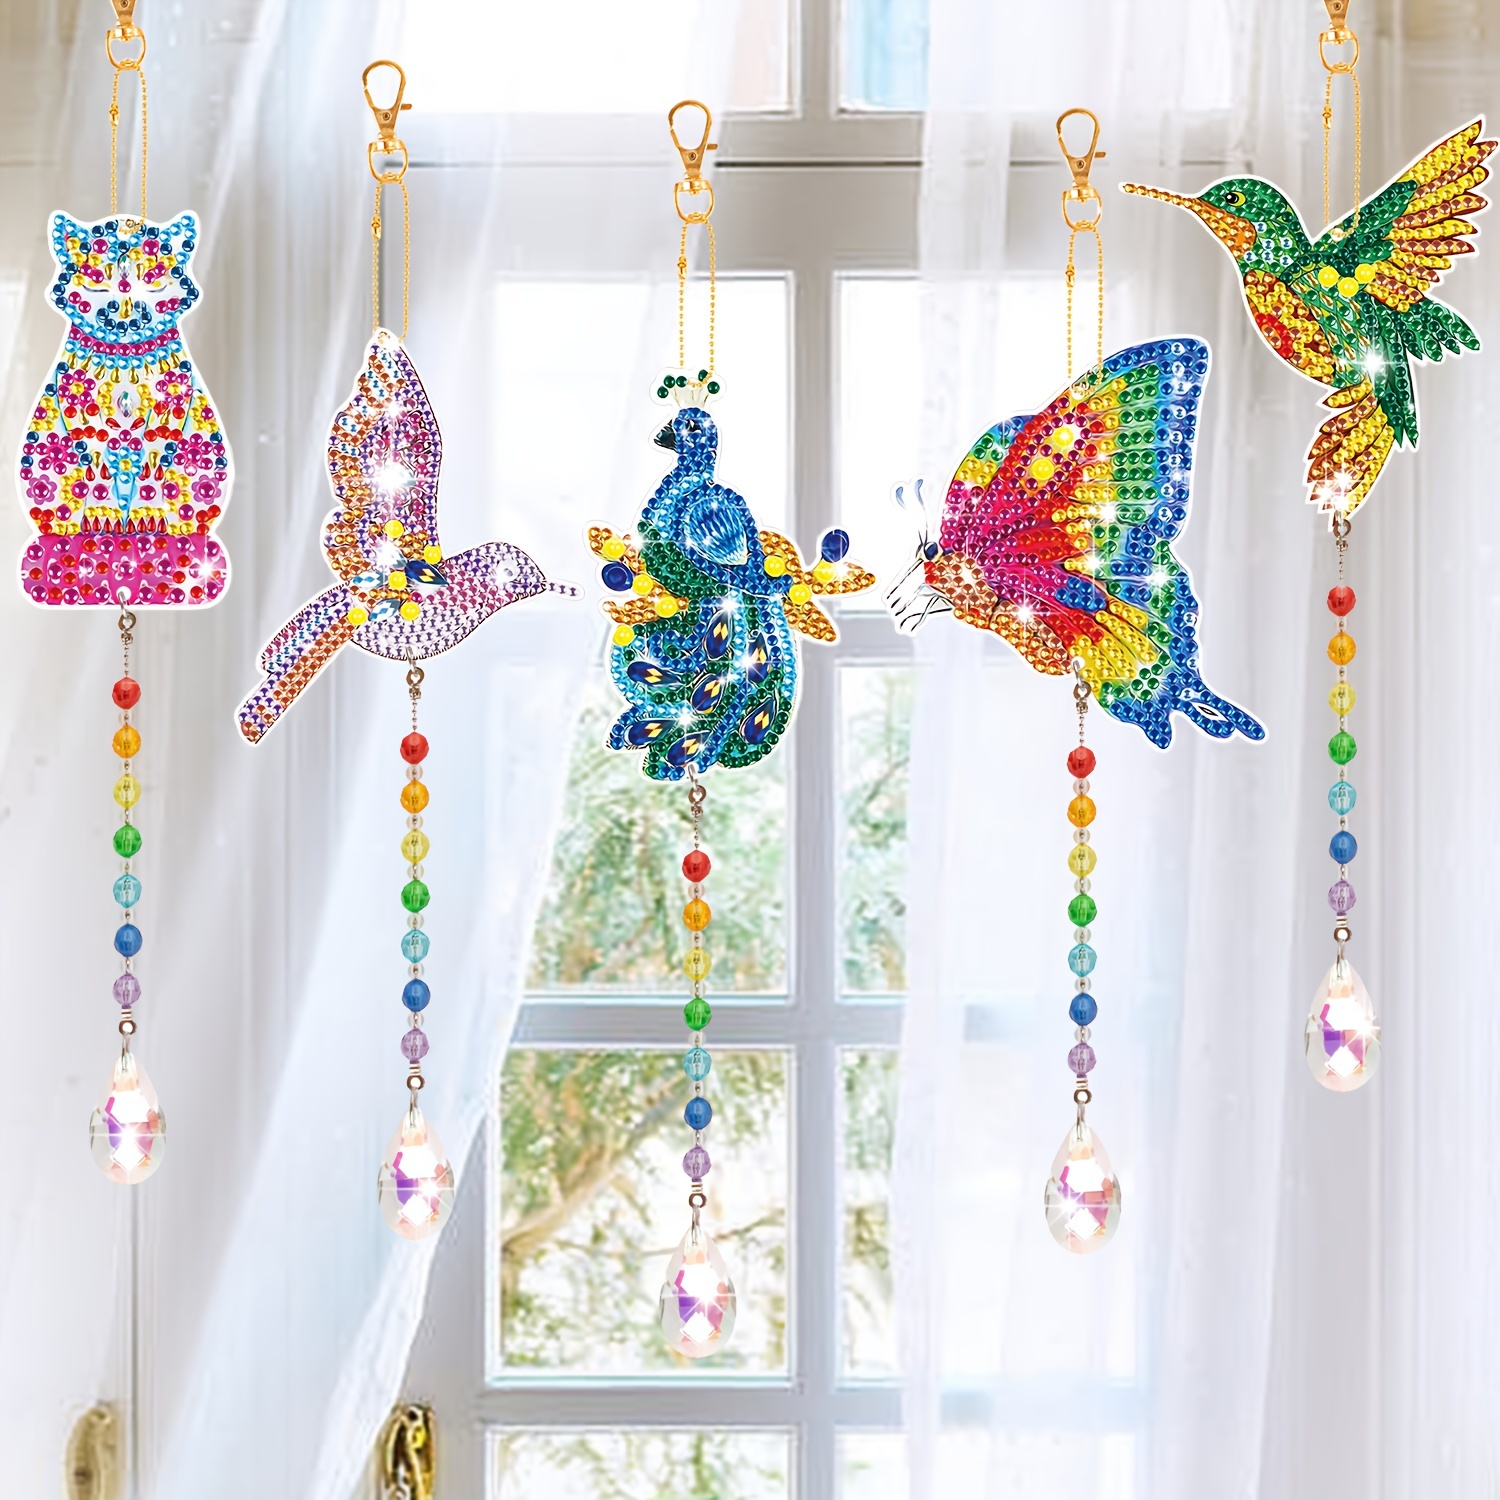 Wind chimes catching dreams Full Drill Diamond Painting Kits - Painting